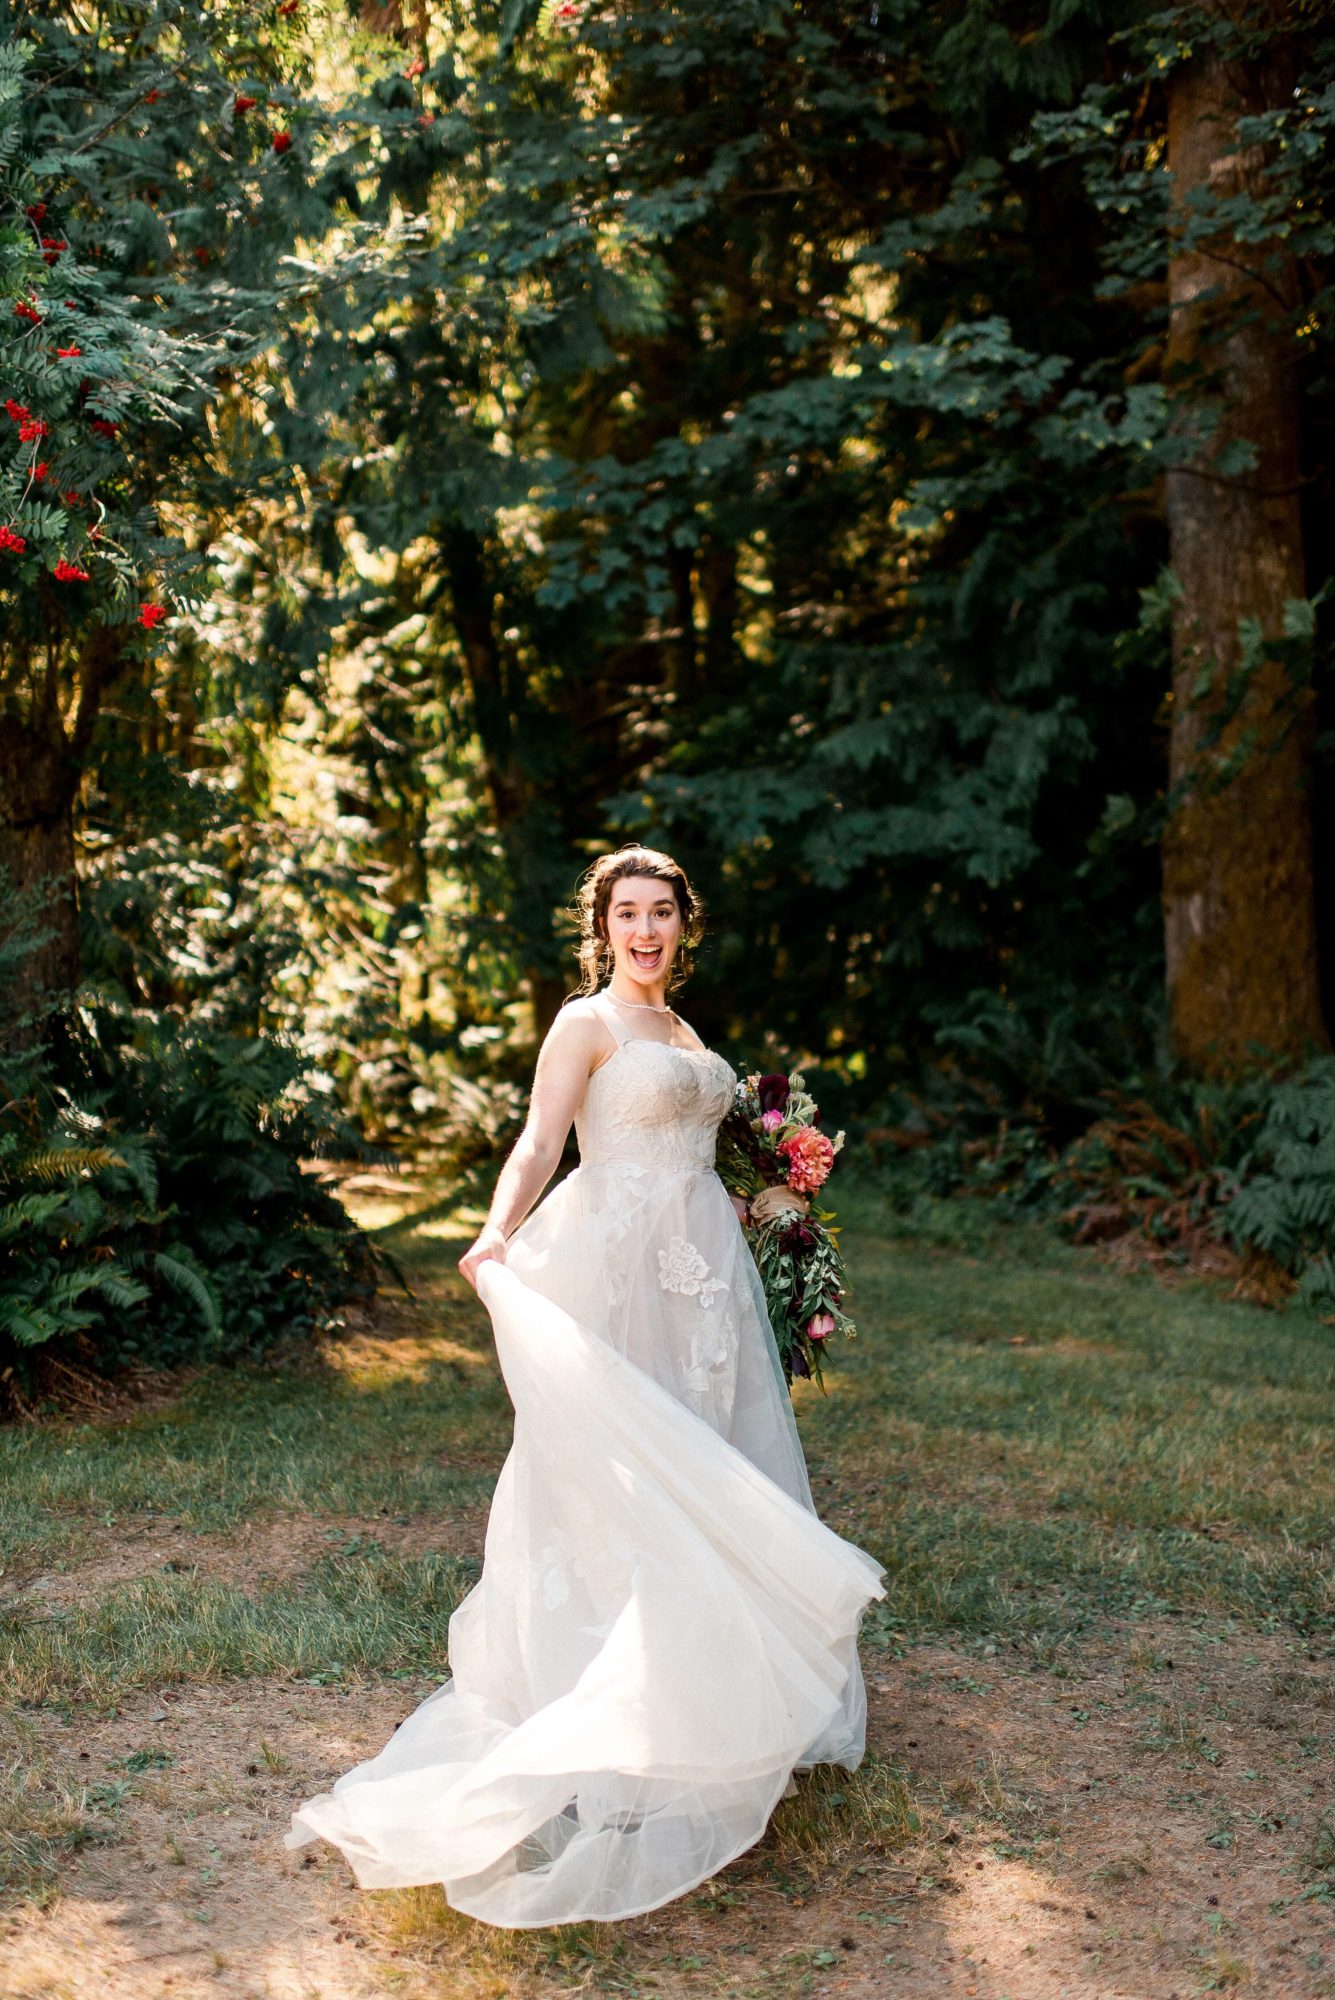 Bride playing with her dress and flowers in a forest path at The Lodge at St. Edwards